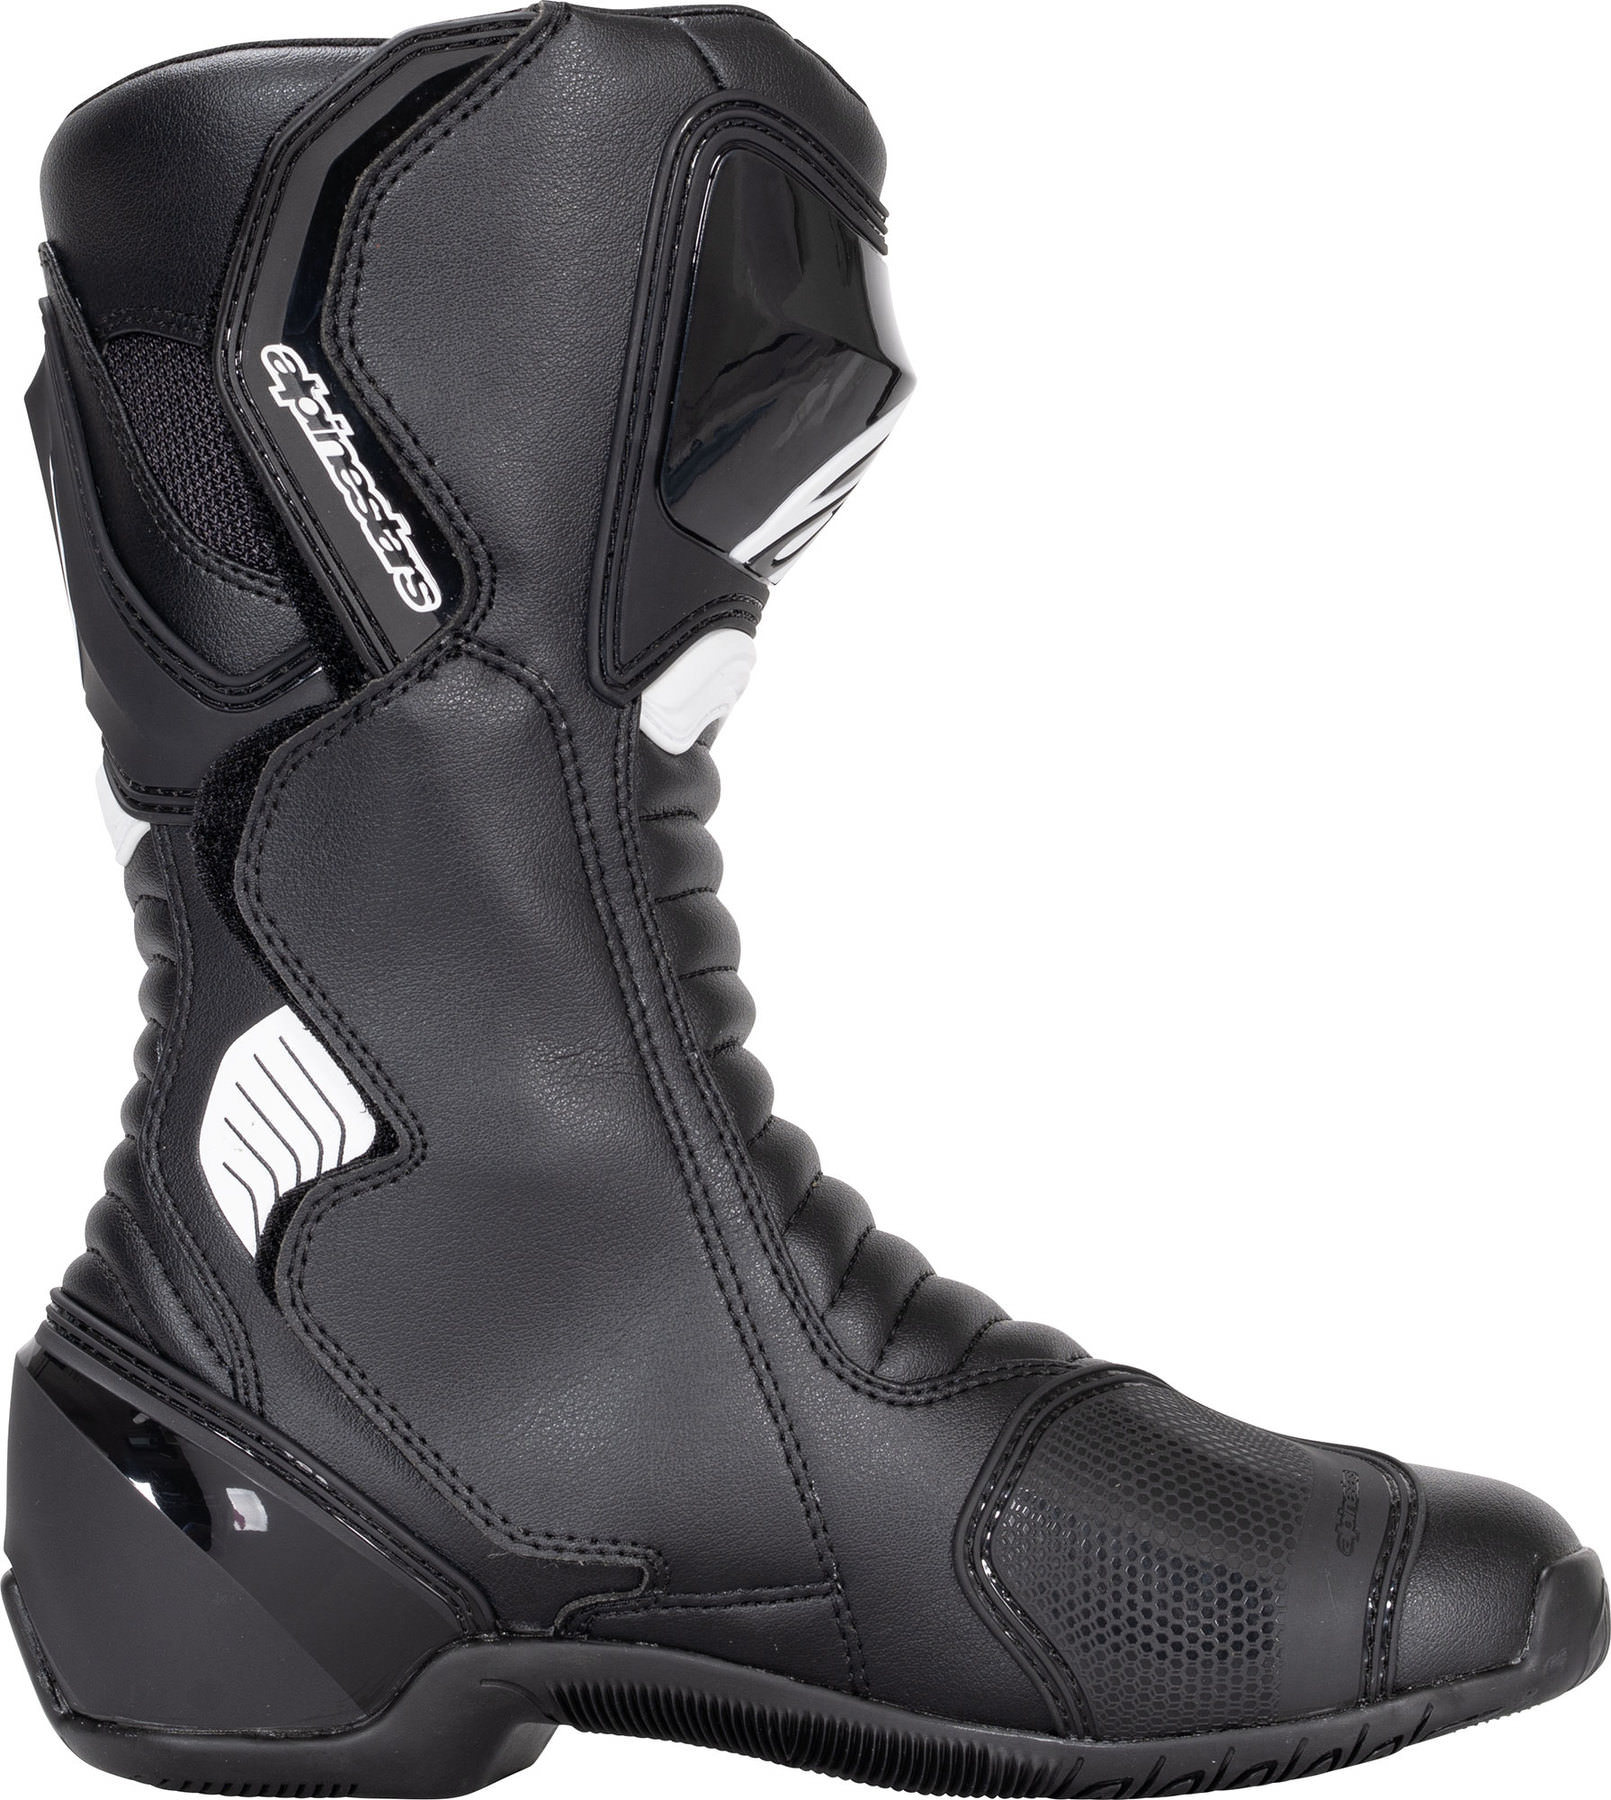 Buy Alpinestars Smx 6 V2 Wp Boots Louis Motorcycle Clothing And